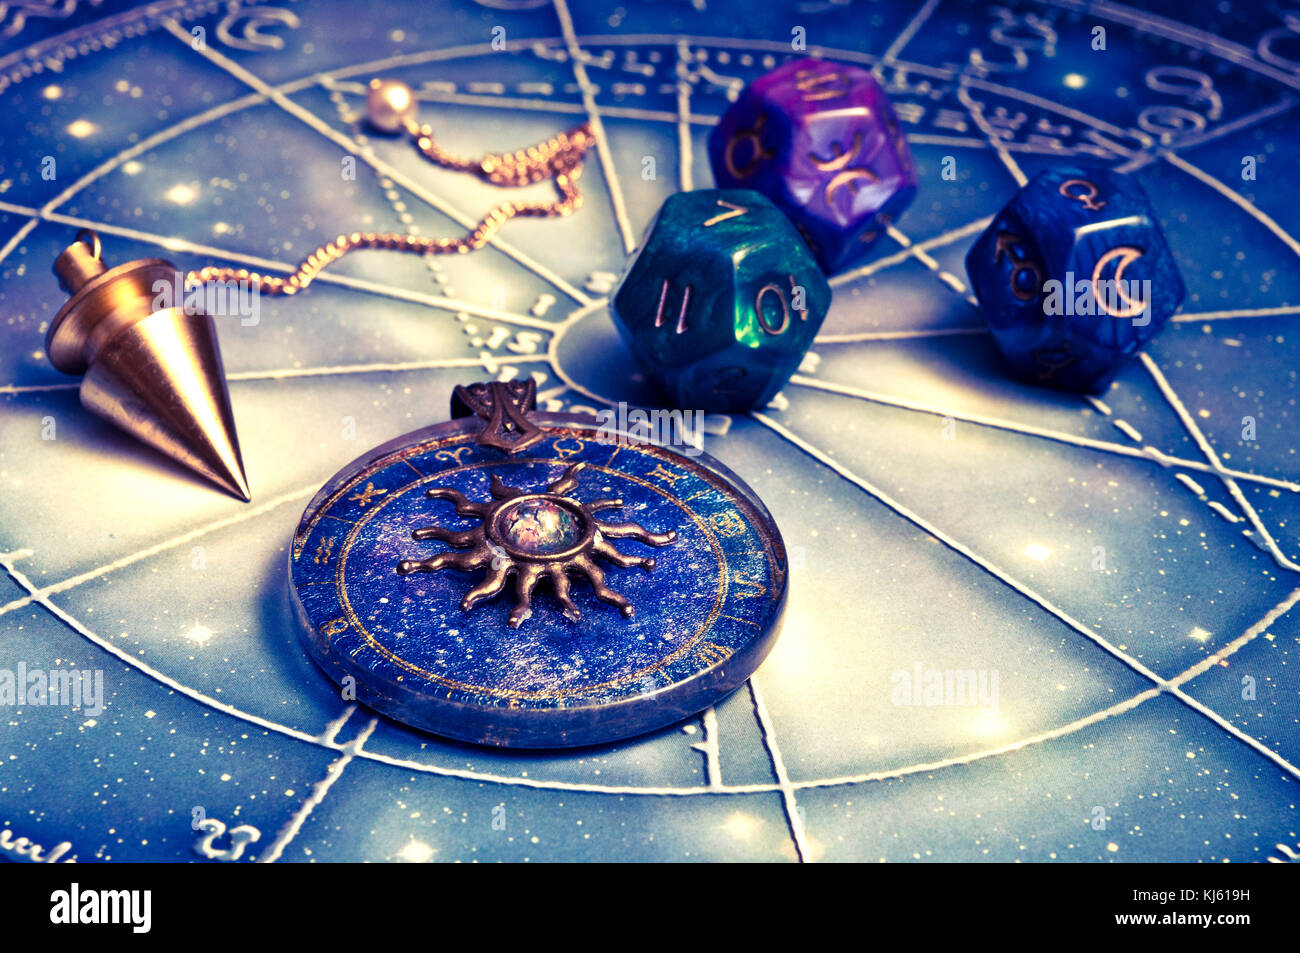 various esoteric objects for divination and fortune telling Stock Photo